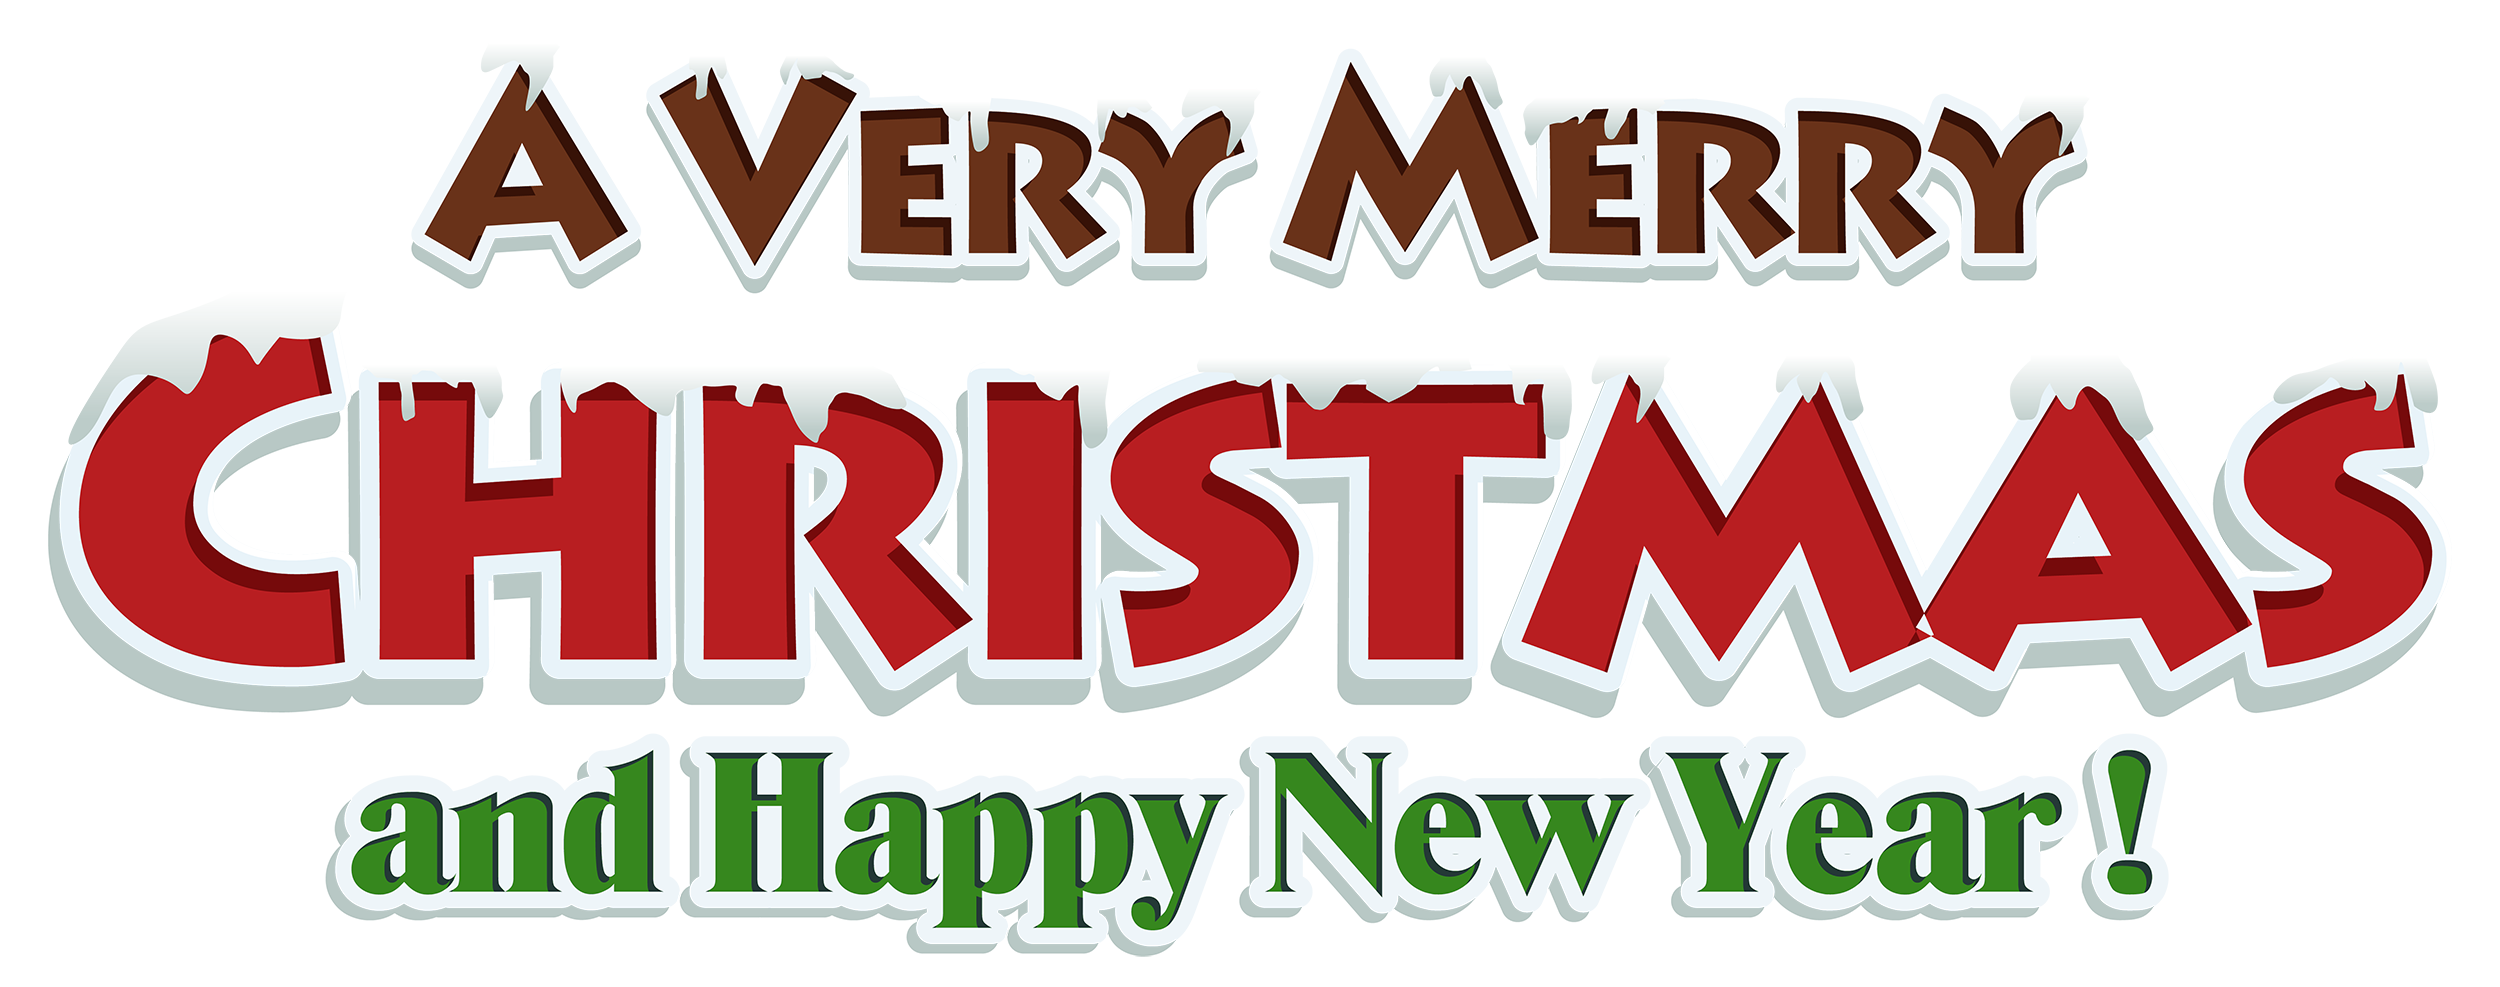 Happy Christmas Text Download PNG Image